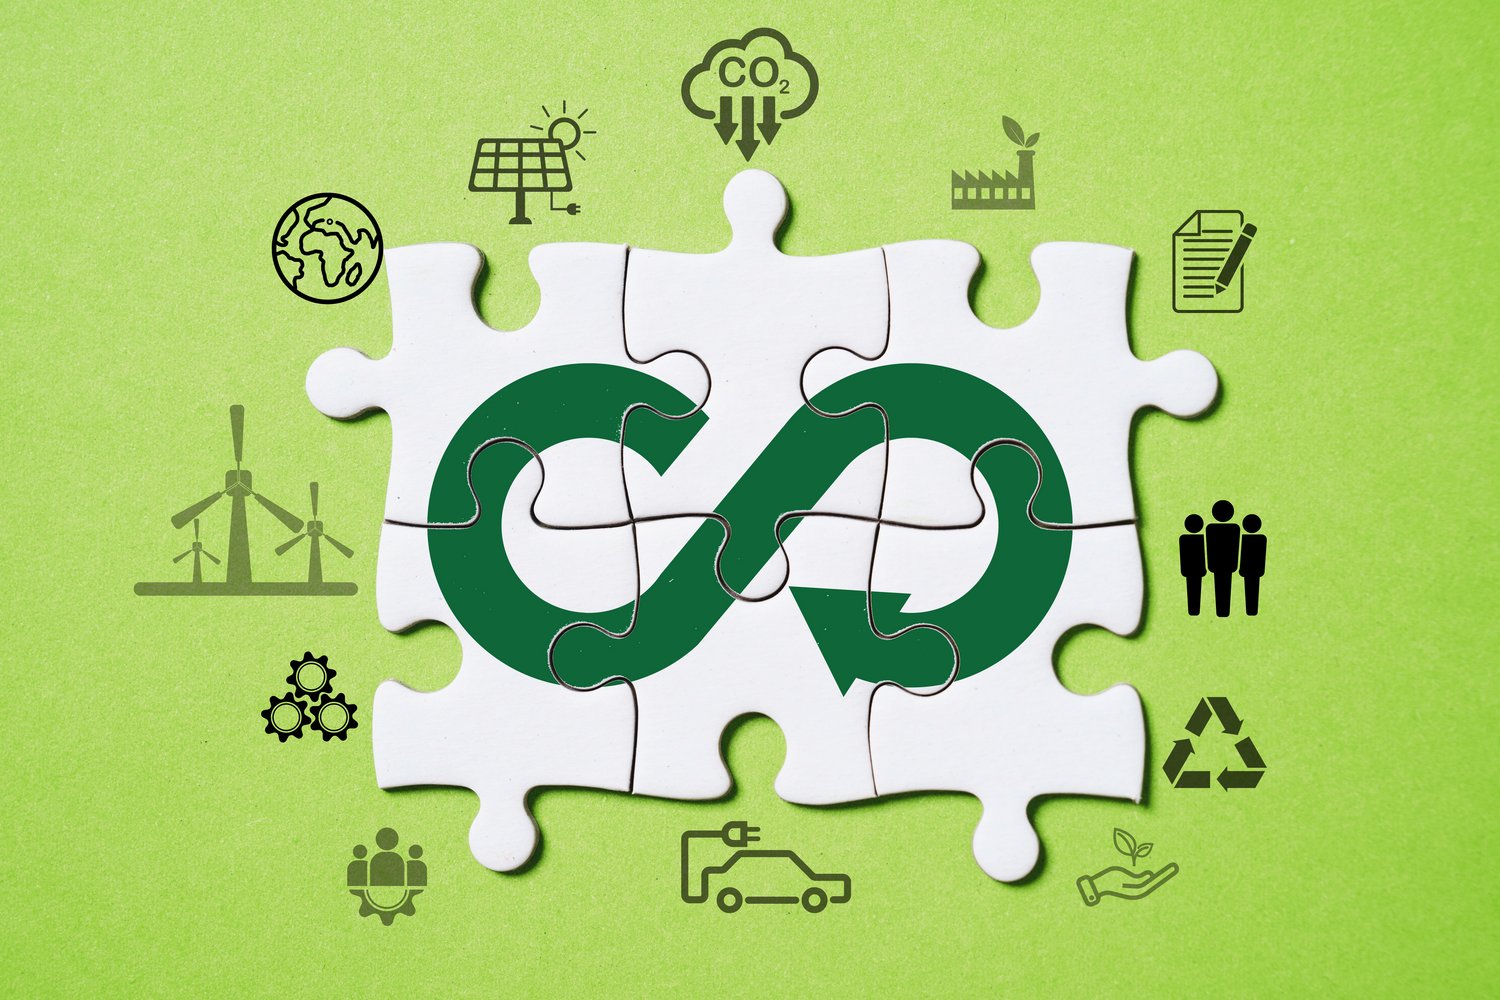 Infinity and ecology icon on white jigsaw puzzle for circular economy and sustainability development together business and environment concept.